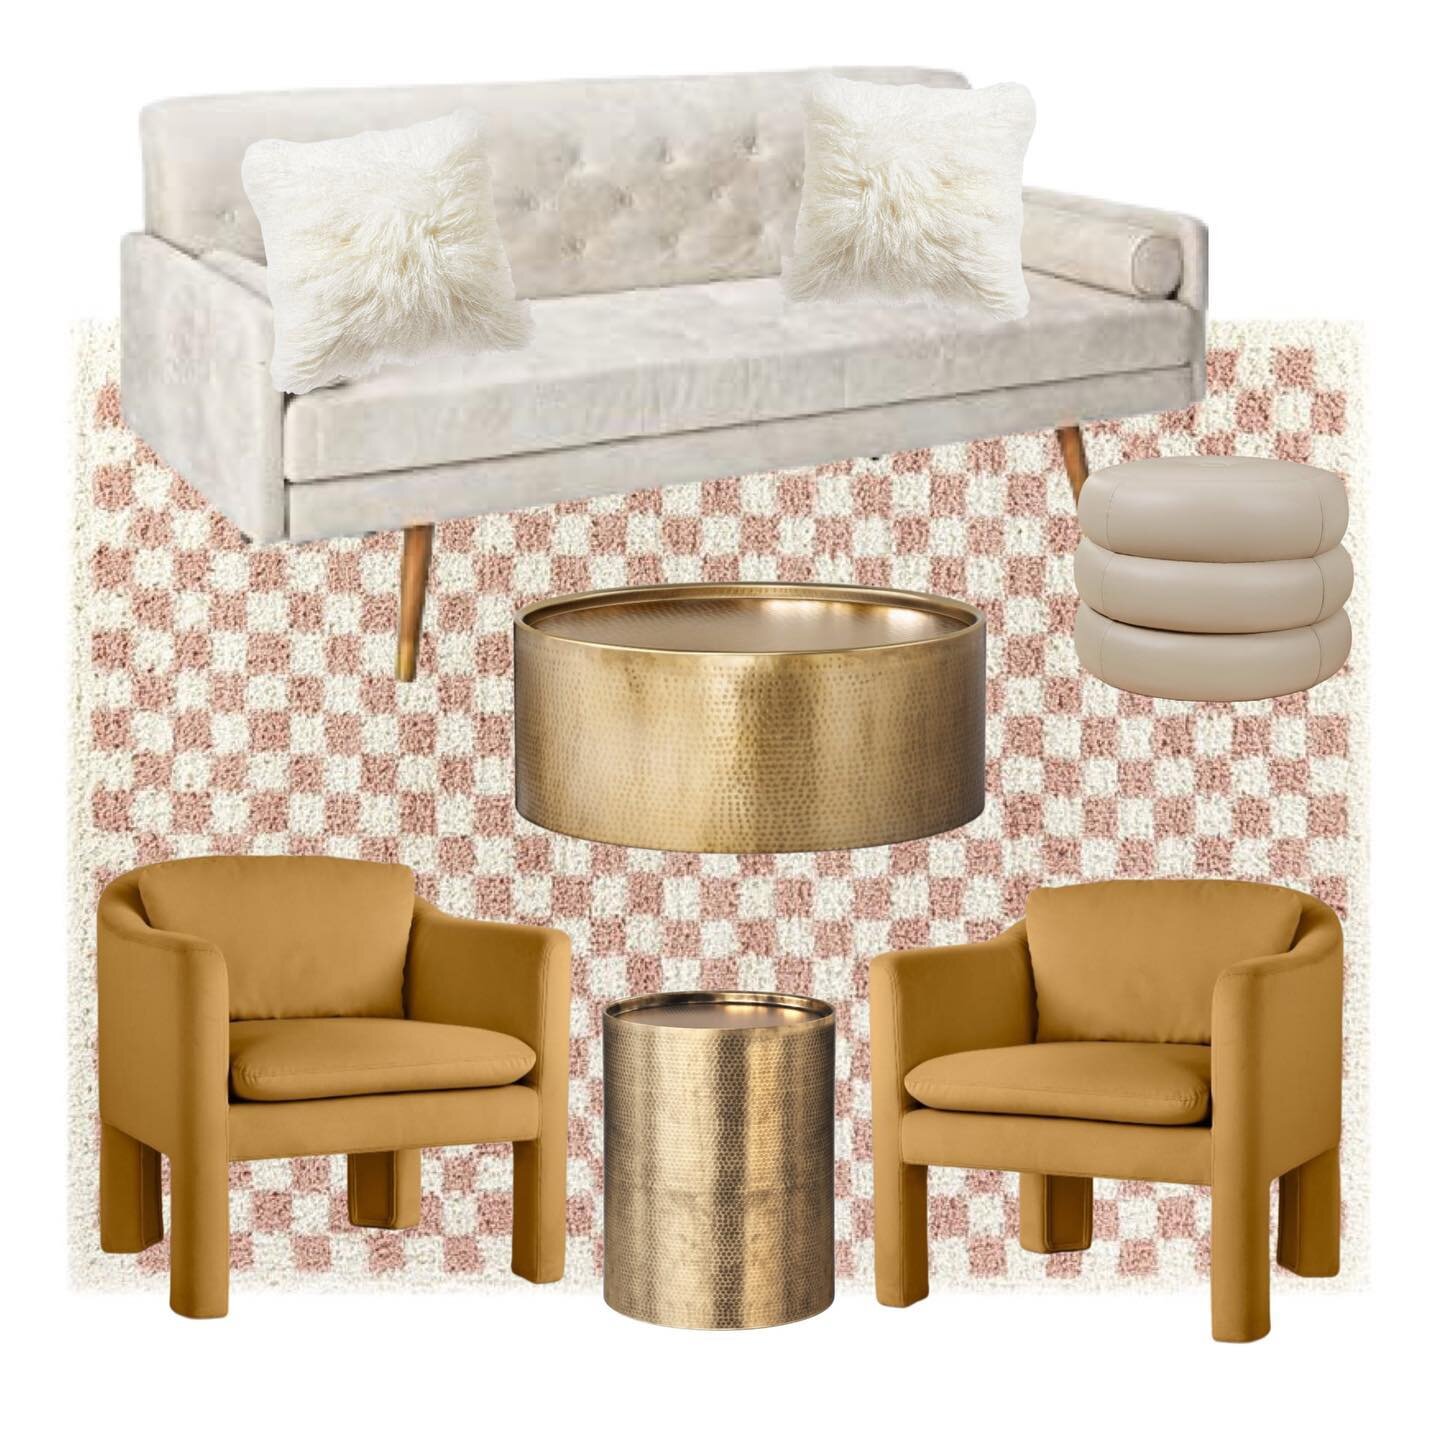 Introducing&hellip;✨ Mari ✨

One of our new sets for 2023, she will be available to rent beginning in December. She features a cream colored sofa, two velvet mustard accent chairs, a leather pouf, gold accent tables and a pink + cream checkered rug. 